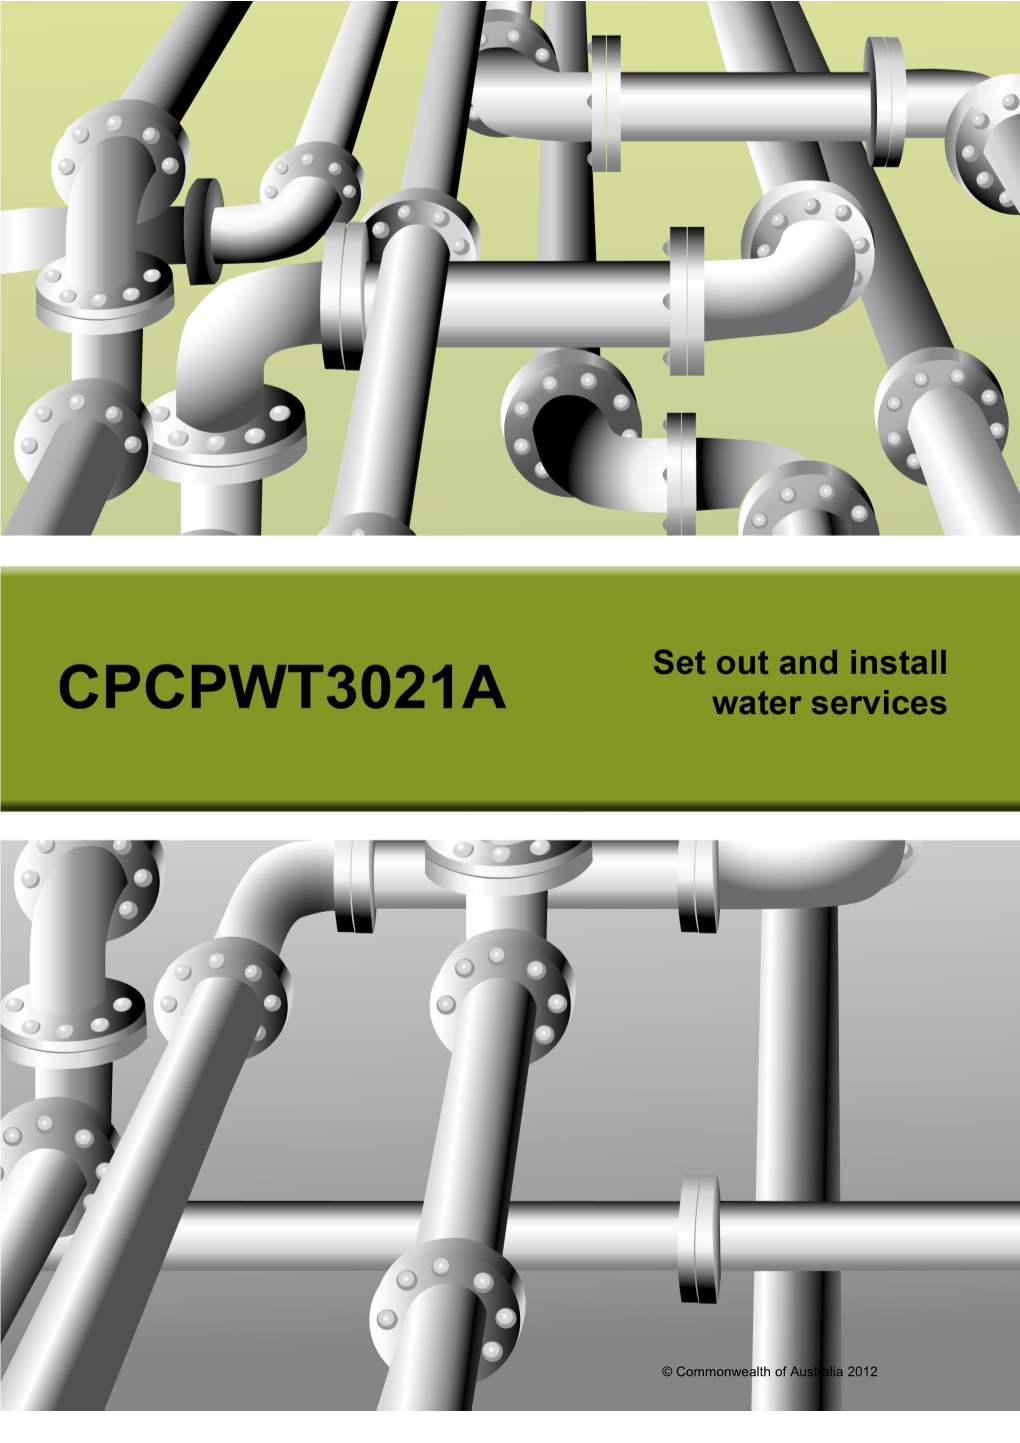 Cpcpwt3021a - Set out and Install Water Services